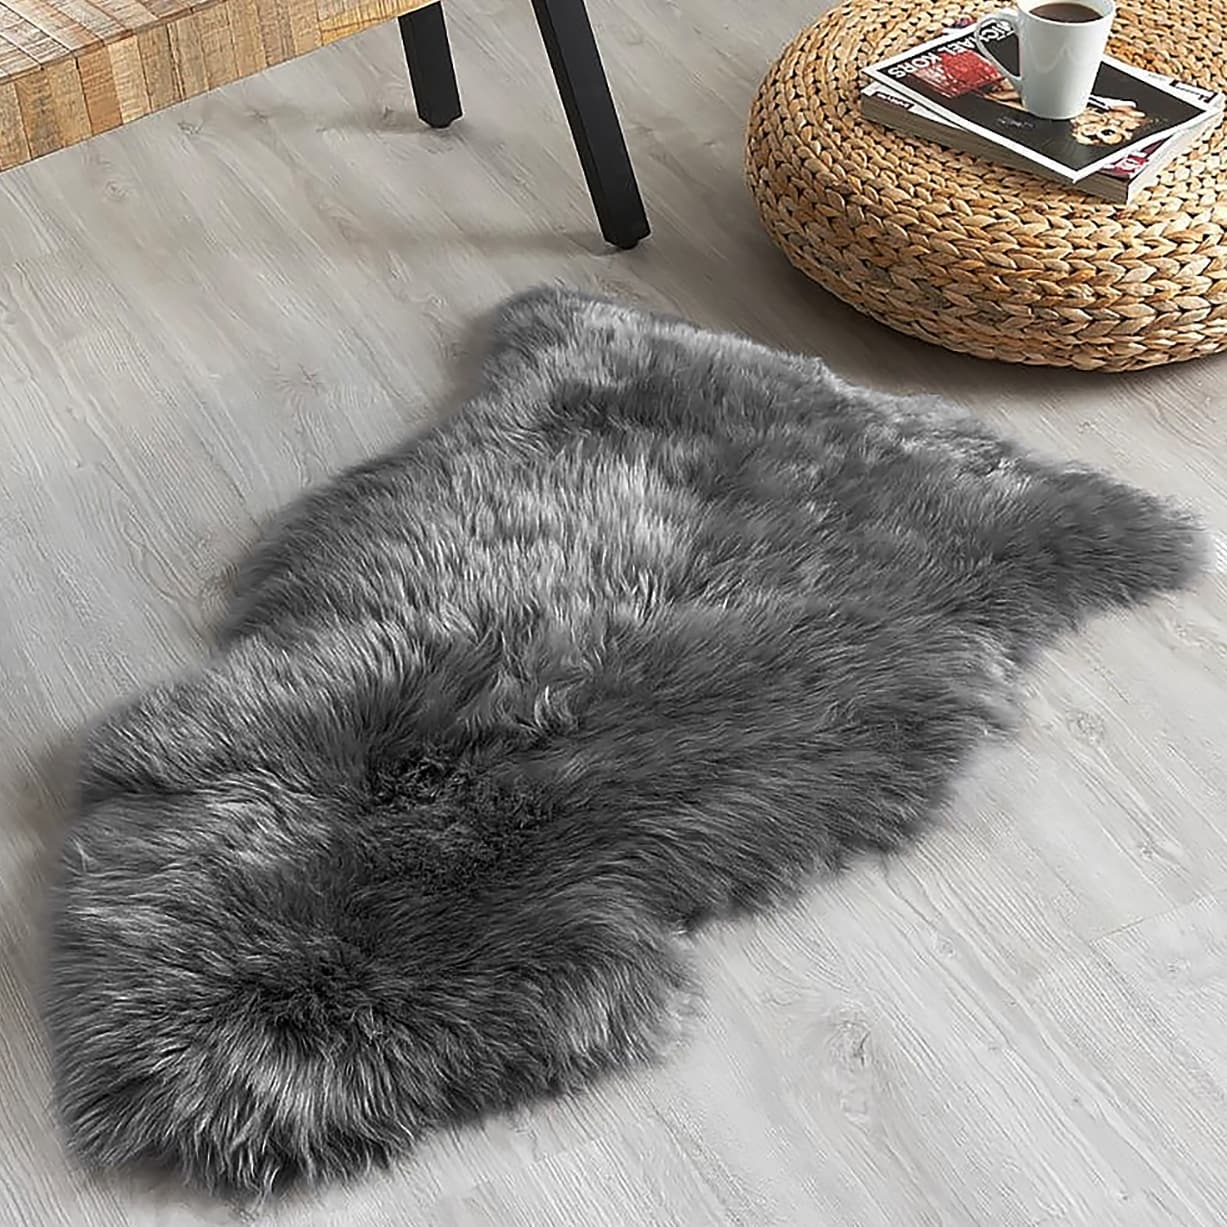 https://ak1.ostkcdn.com/images/products/is/images/direct/4c344e04a0984a9b2810c19ed9201ac28545a181/2x3-Feet-Super-Soft-Fluffy-Grey-Modern-Shaped-Faux-Sheepskin-Area-Rug.jpg